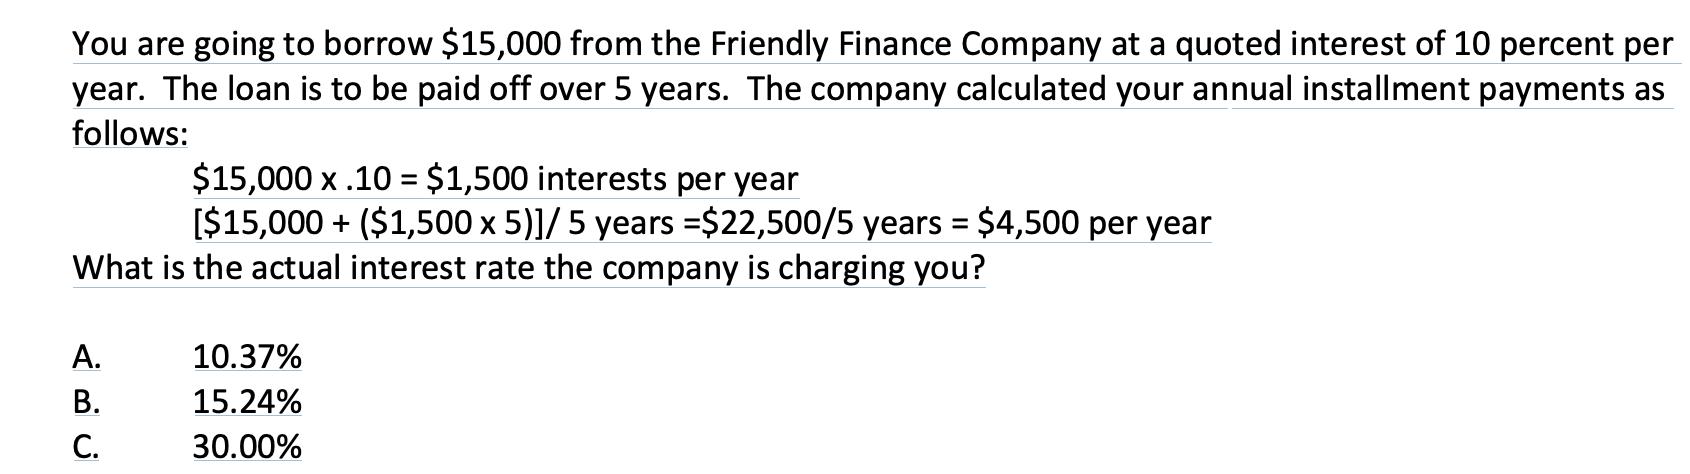 You are going to borrow $15,000 from the Friendly Finance Company at a quoted interest of 10 percent per year. The loan is to